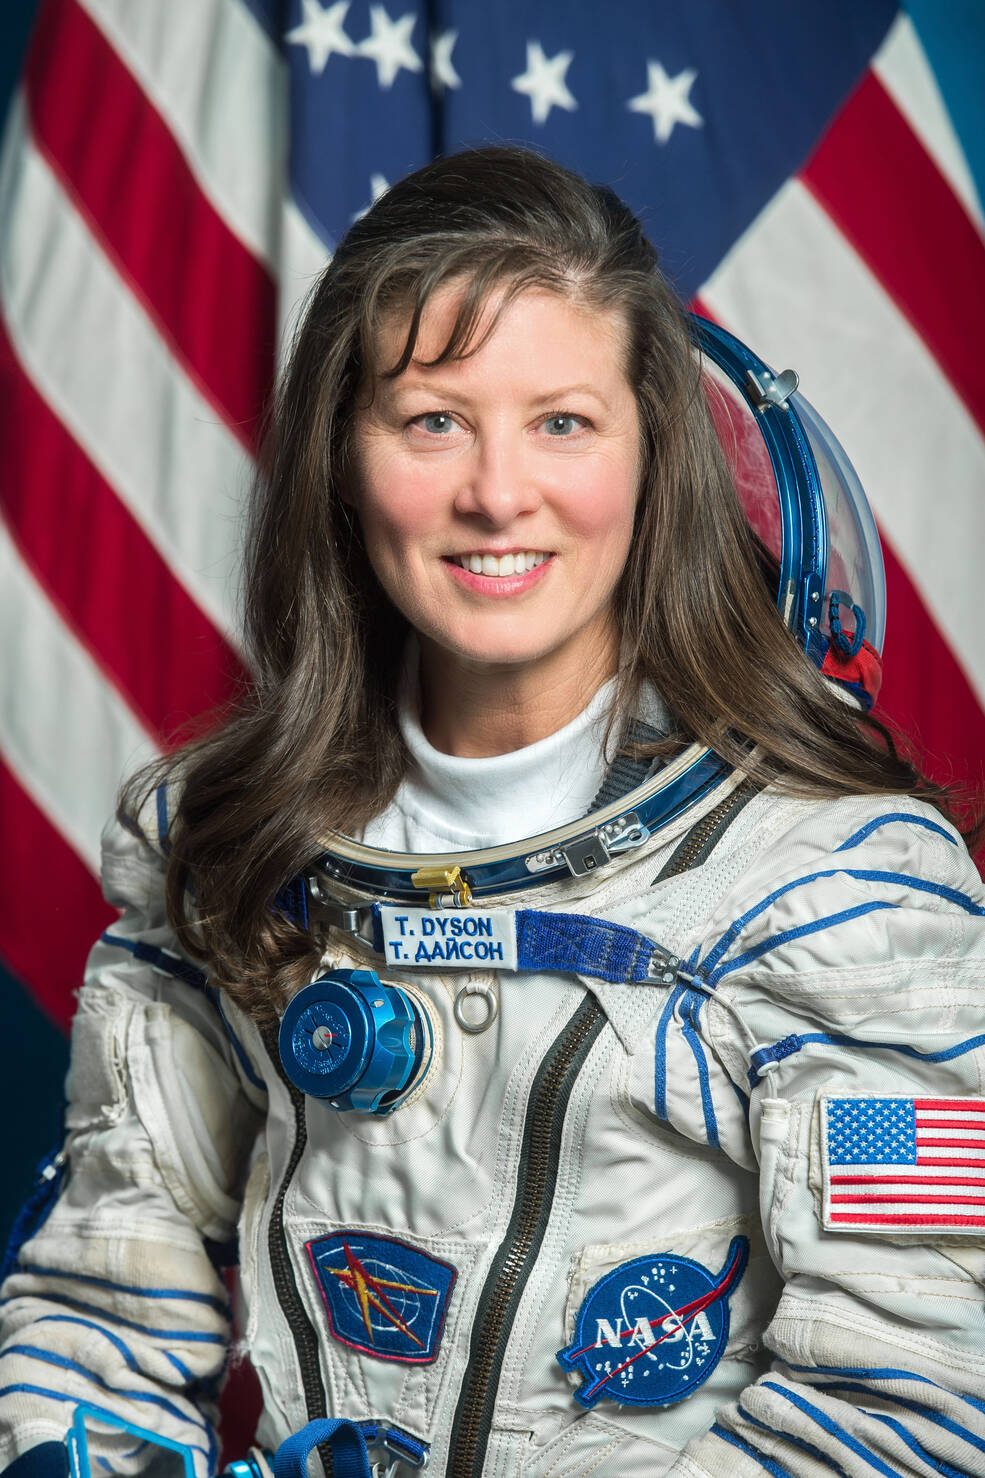 NASA astronaut Tracy C. Dyson is assigned to a mission to the International Space Station as a flight engineer and member of the Expedition 70/71 crew. Dyson will launch on the Roscosmos Soyuz MS-25 spacecraft.